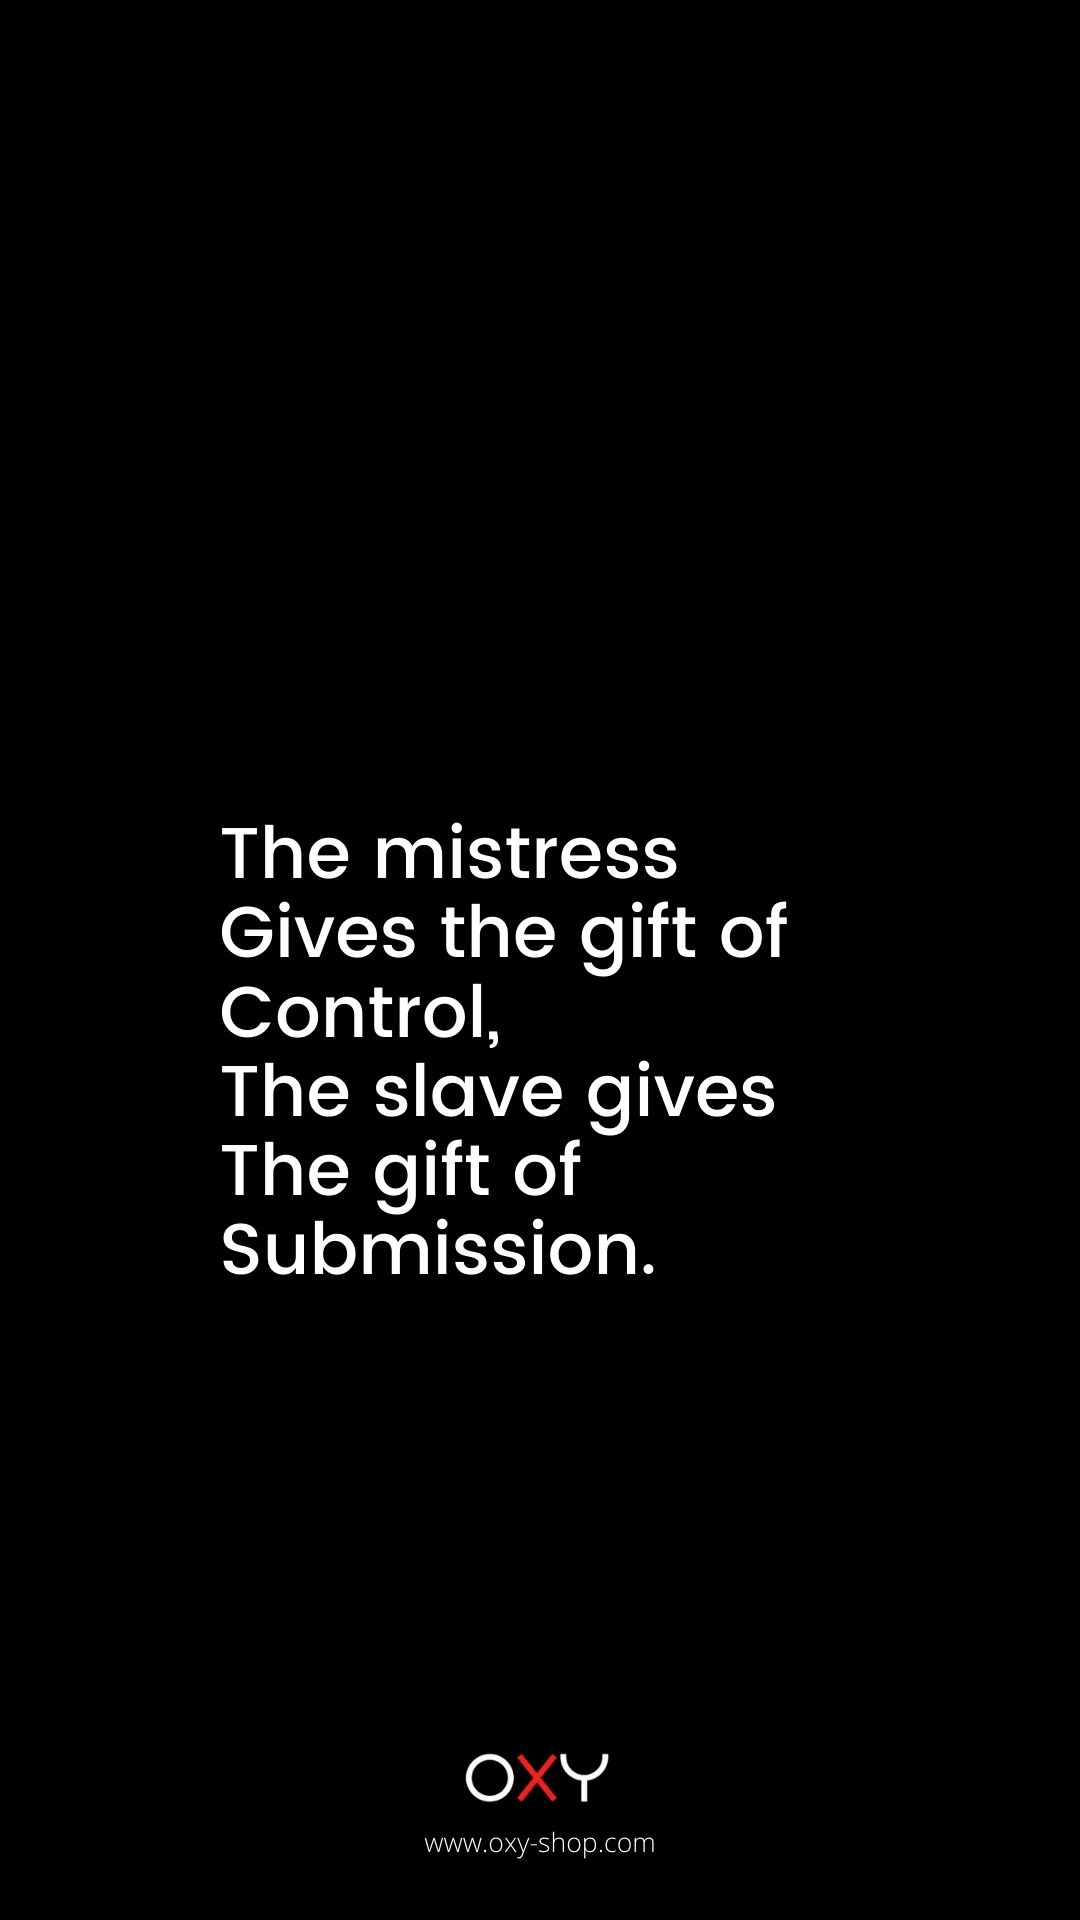 The Mistress gives the gift of control, the slave gives the gift of submission. - BDSM wallpaper